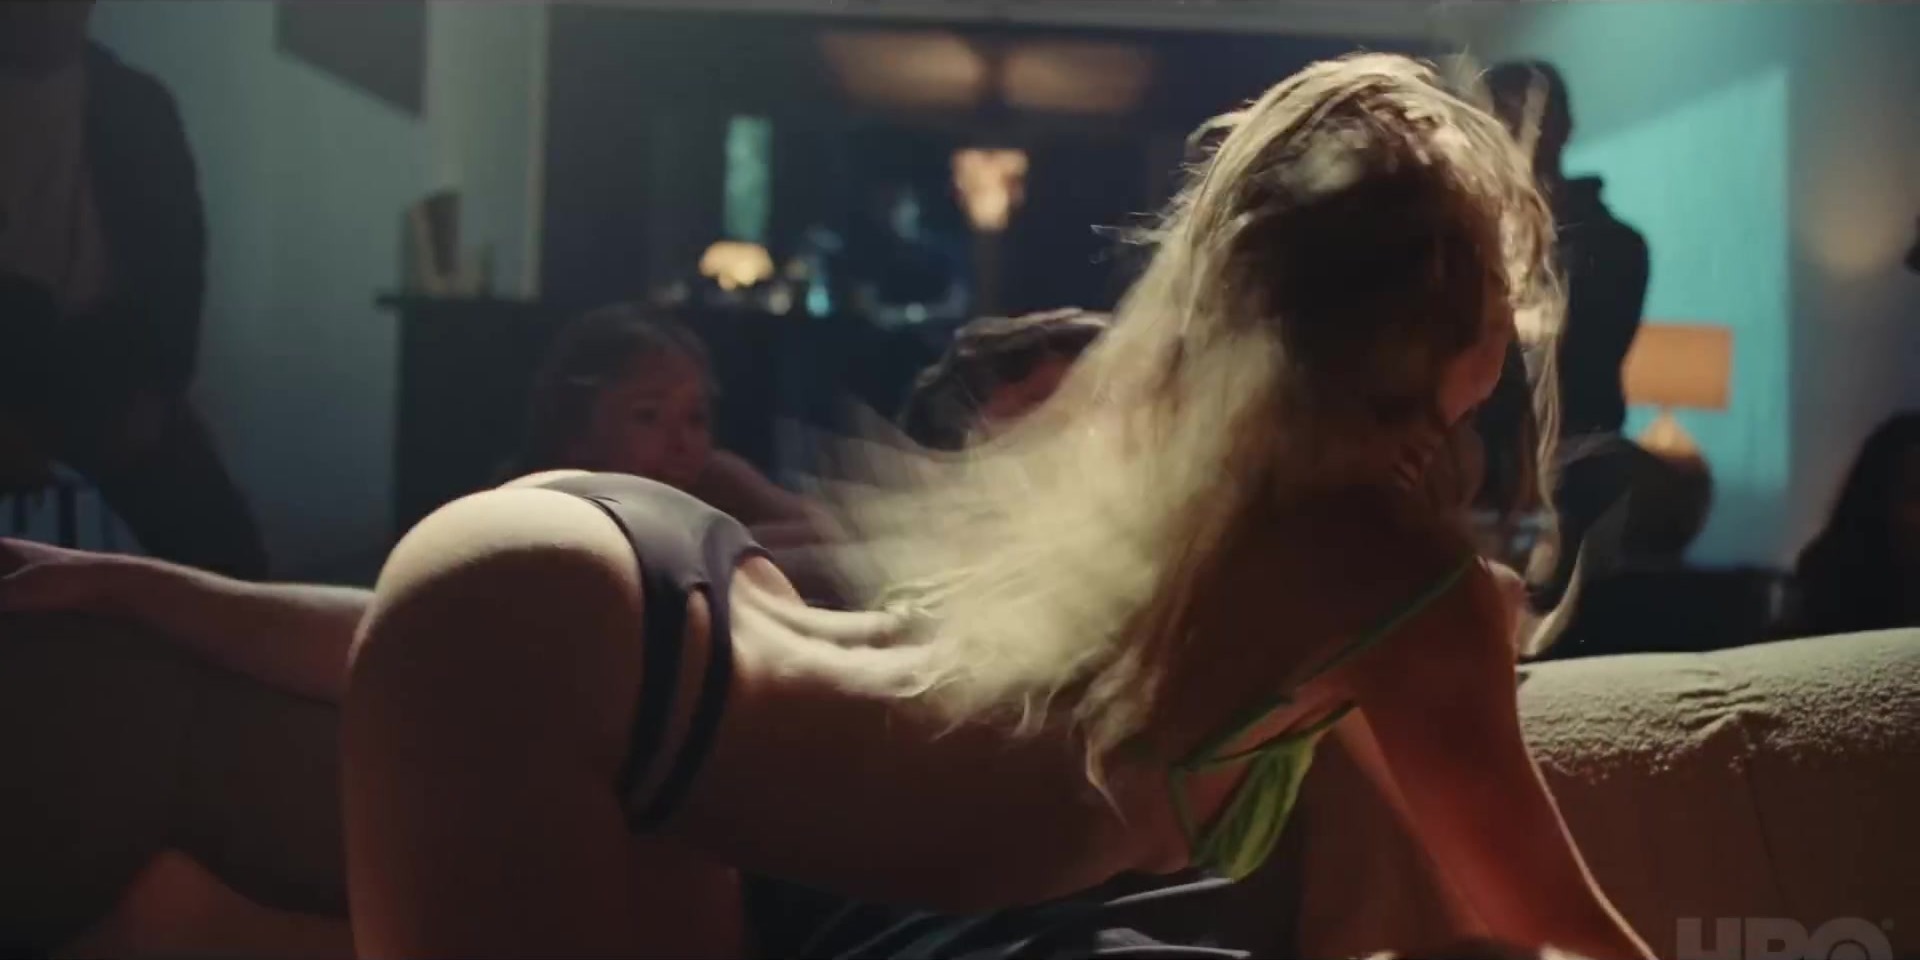 Lily Rose Depp Sexy in her Latest “The Idol” Trailer! - Photo 5